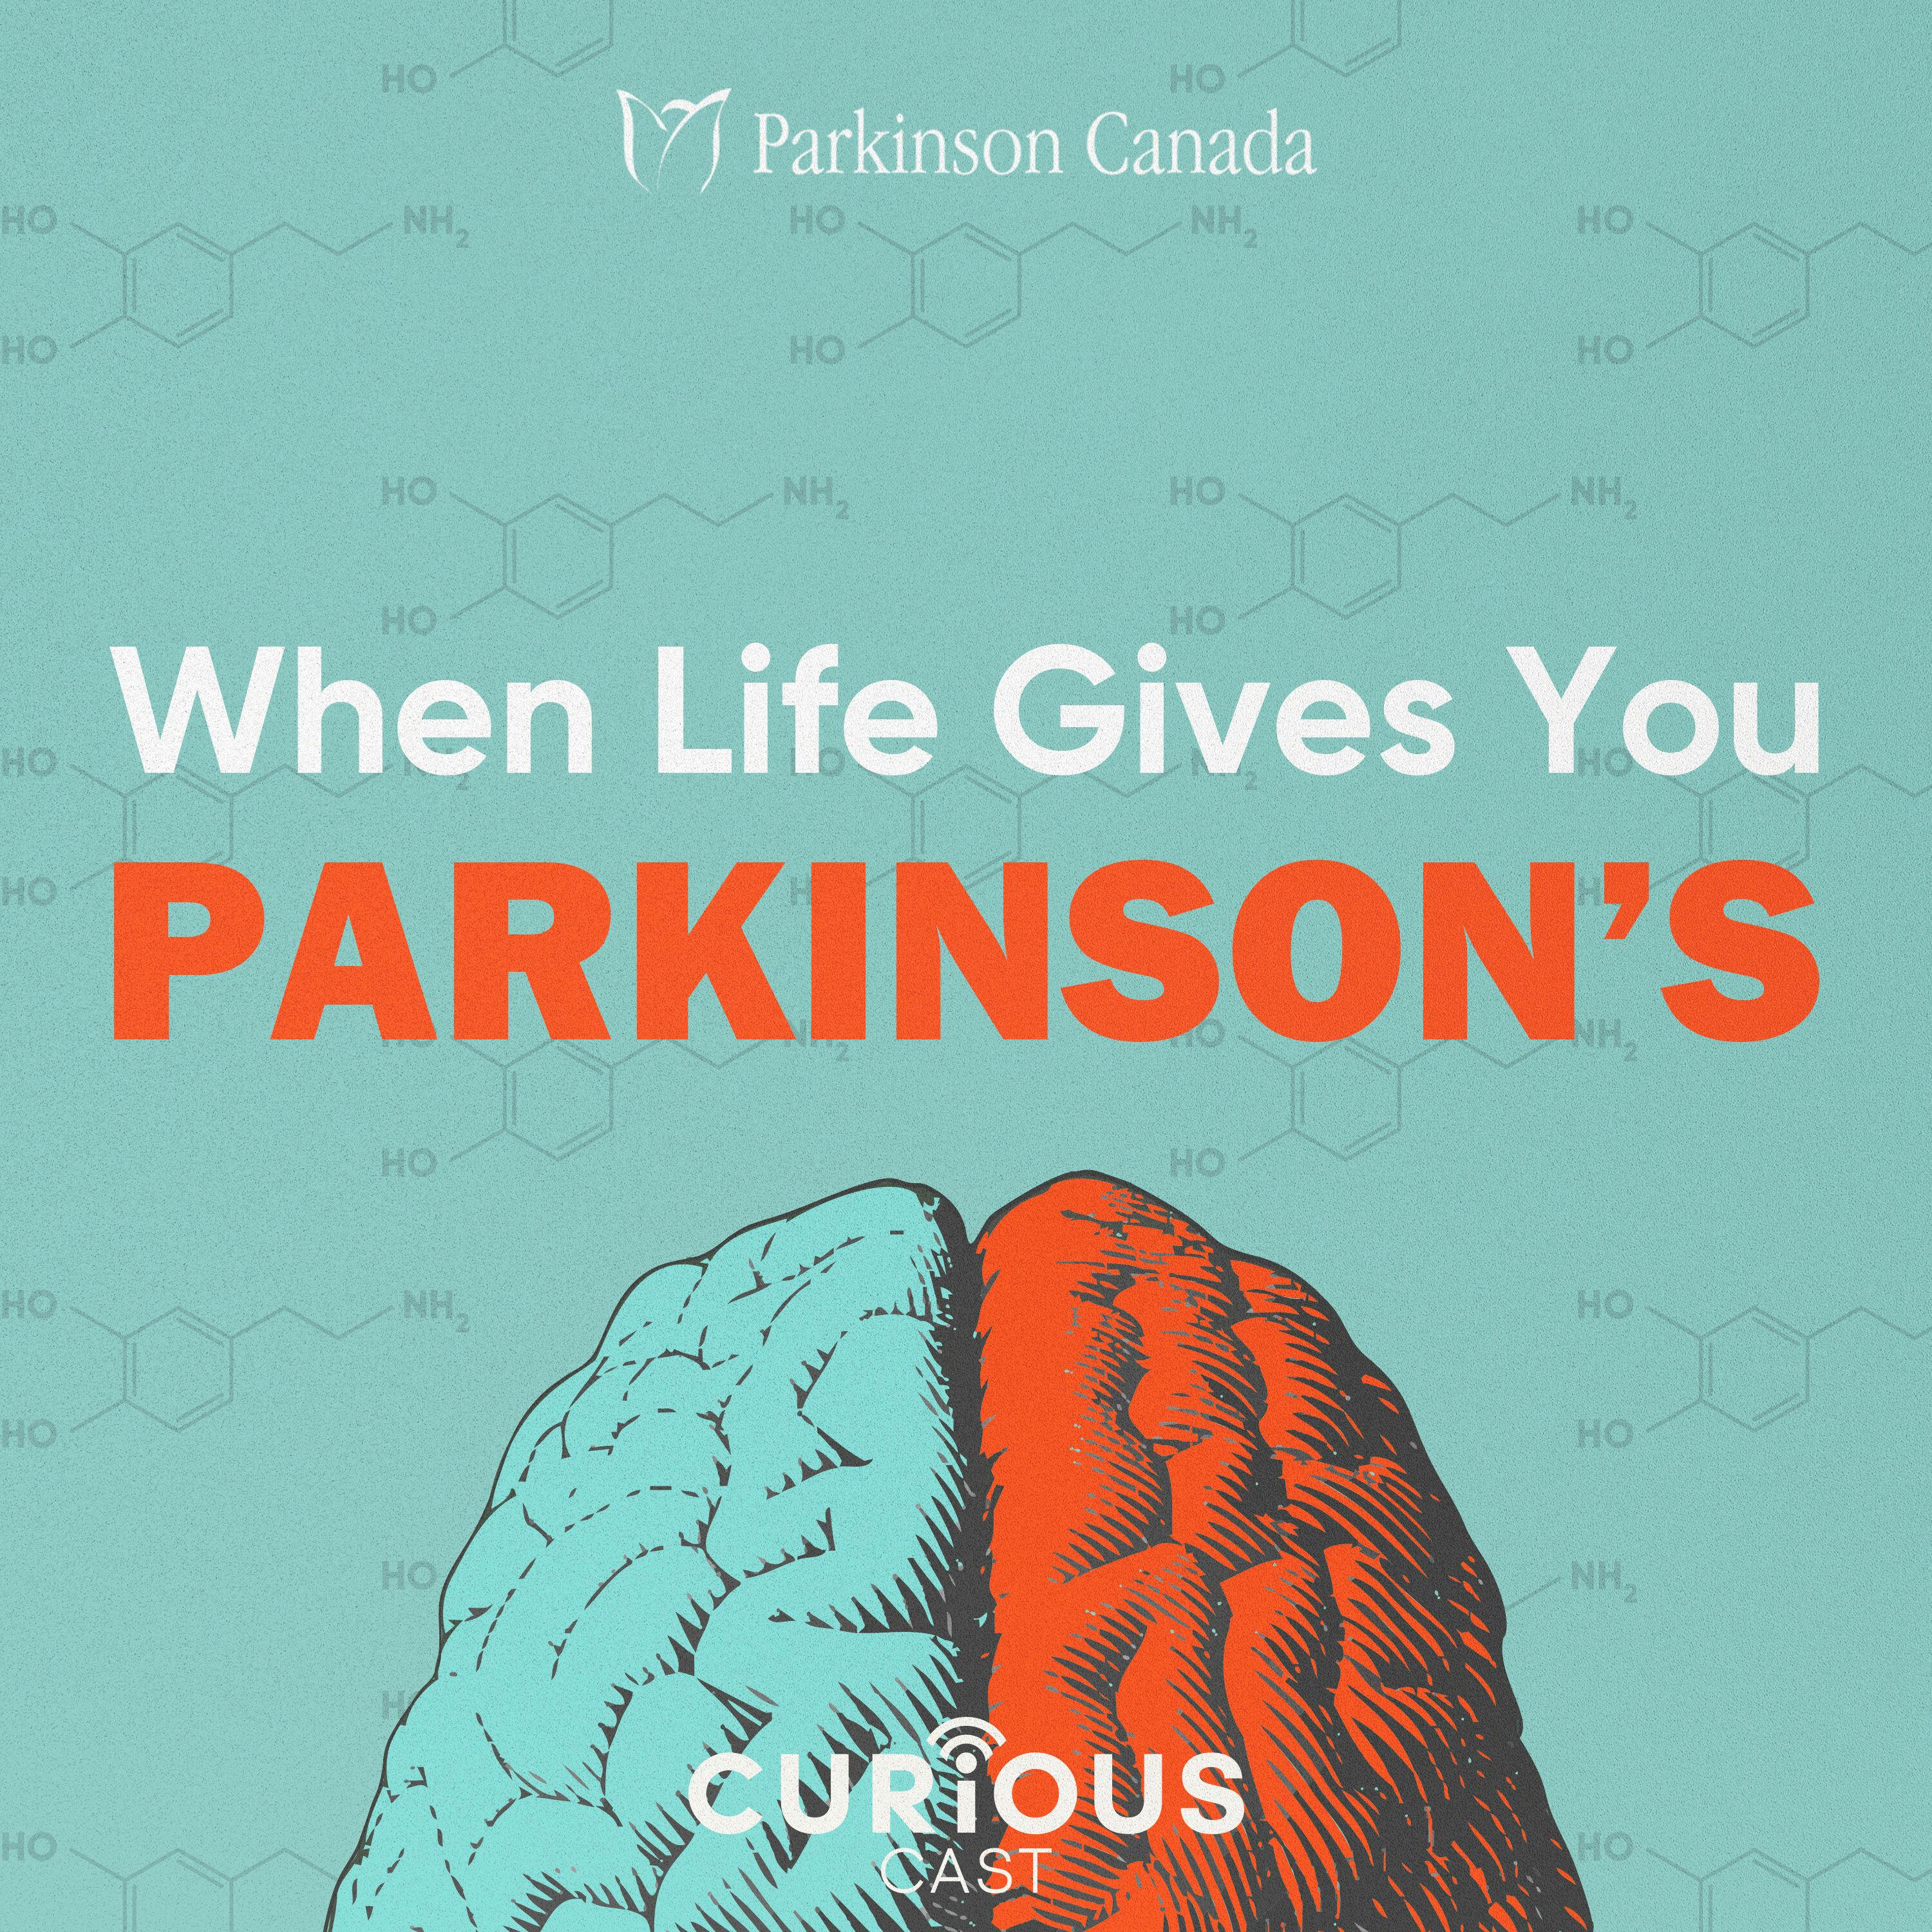 The Never-ending Hunt For a Parkinson’s Cure